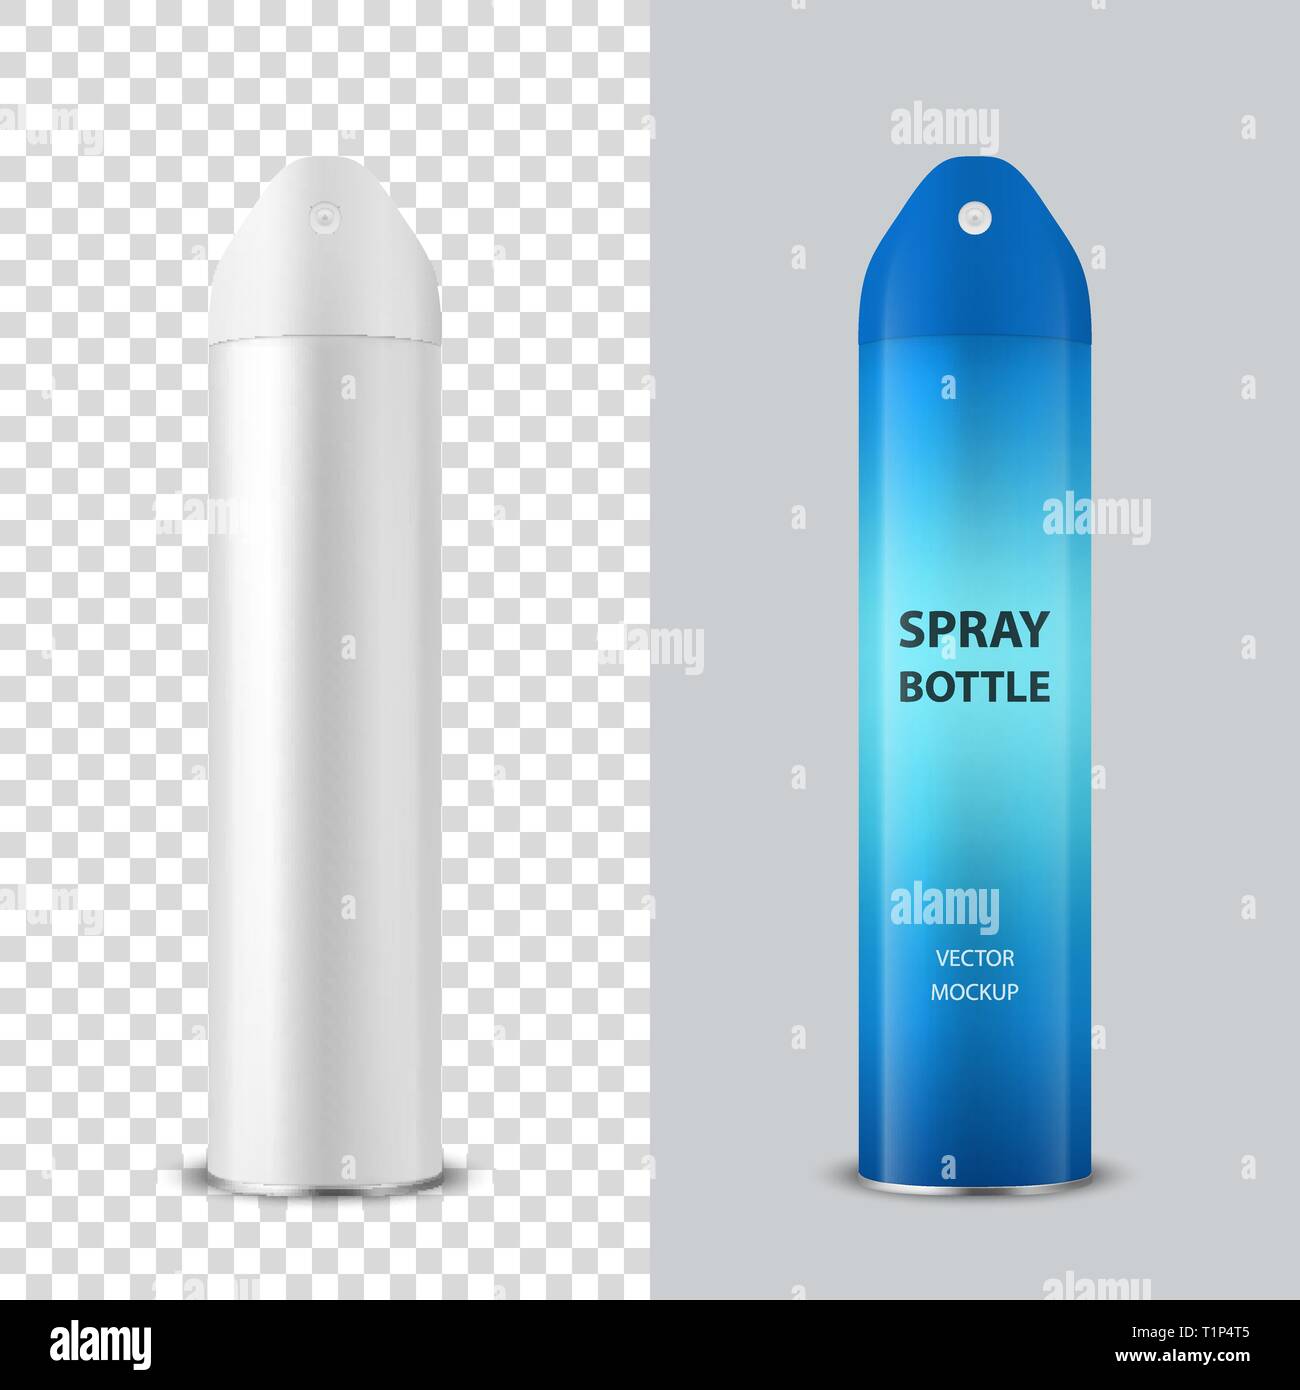 Download Vector 3d Realistic White Blank Spray Can Air Freshener Bottle Closeup Isolated Design Template Of Sprayer For Mock Up Package Hairspray Stock Vector Image Art Alamy